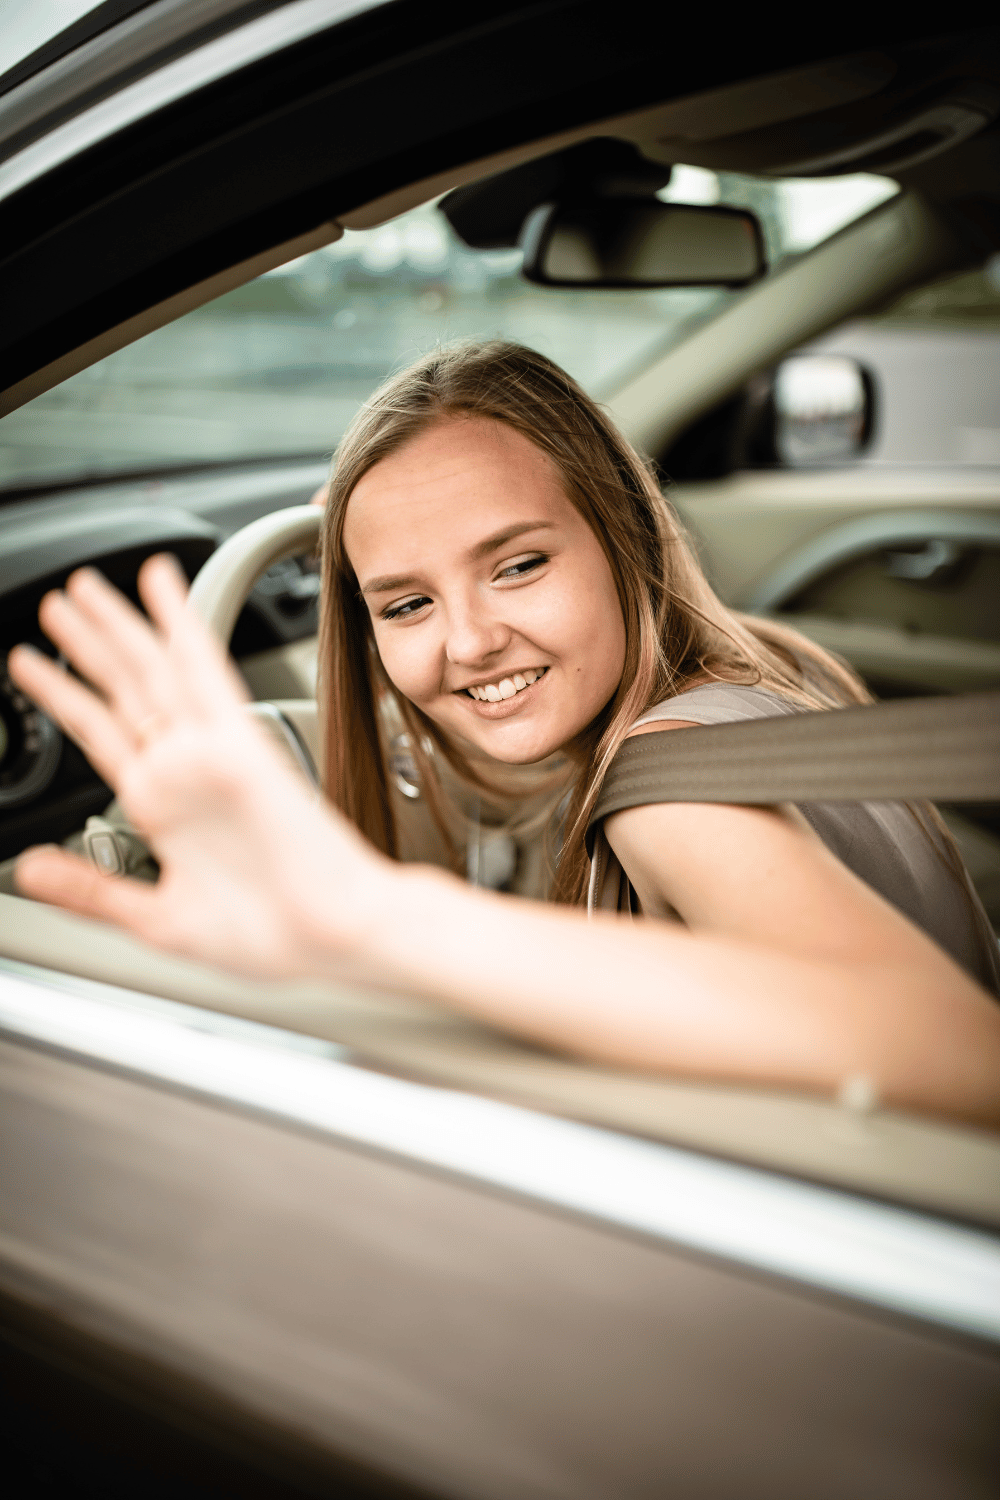 Common Driving Mistakes Young Drivers Make